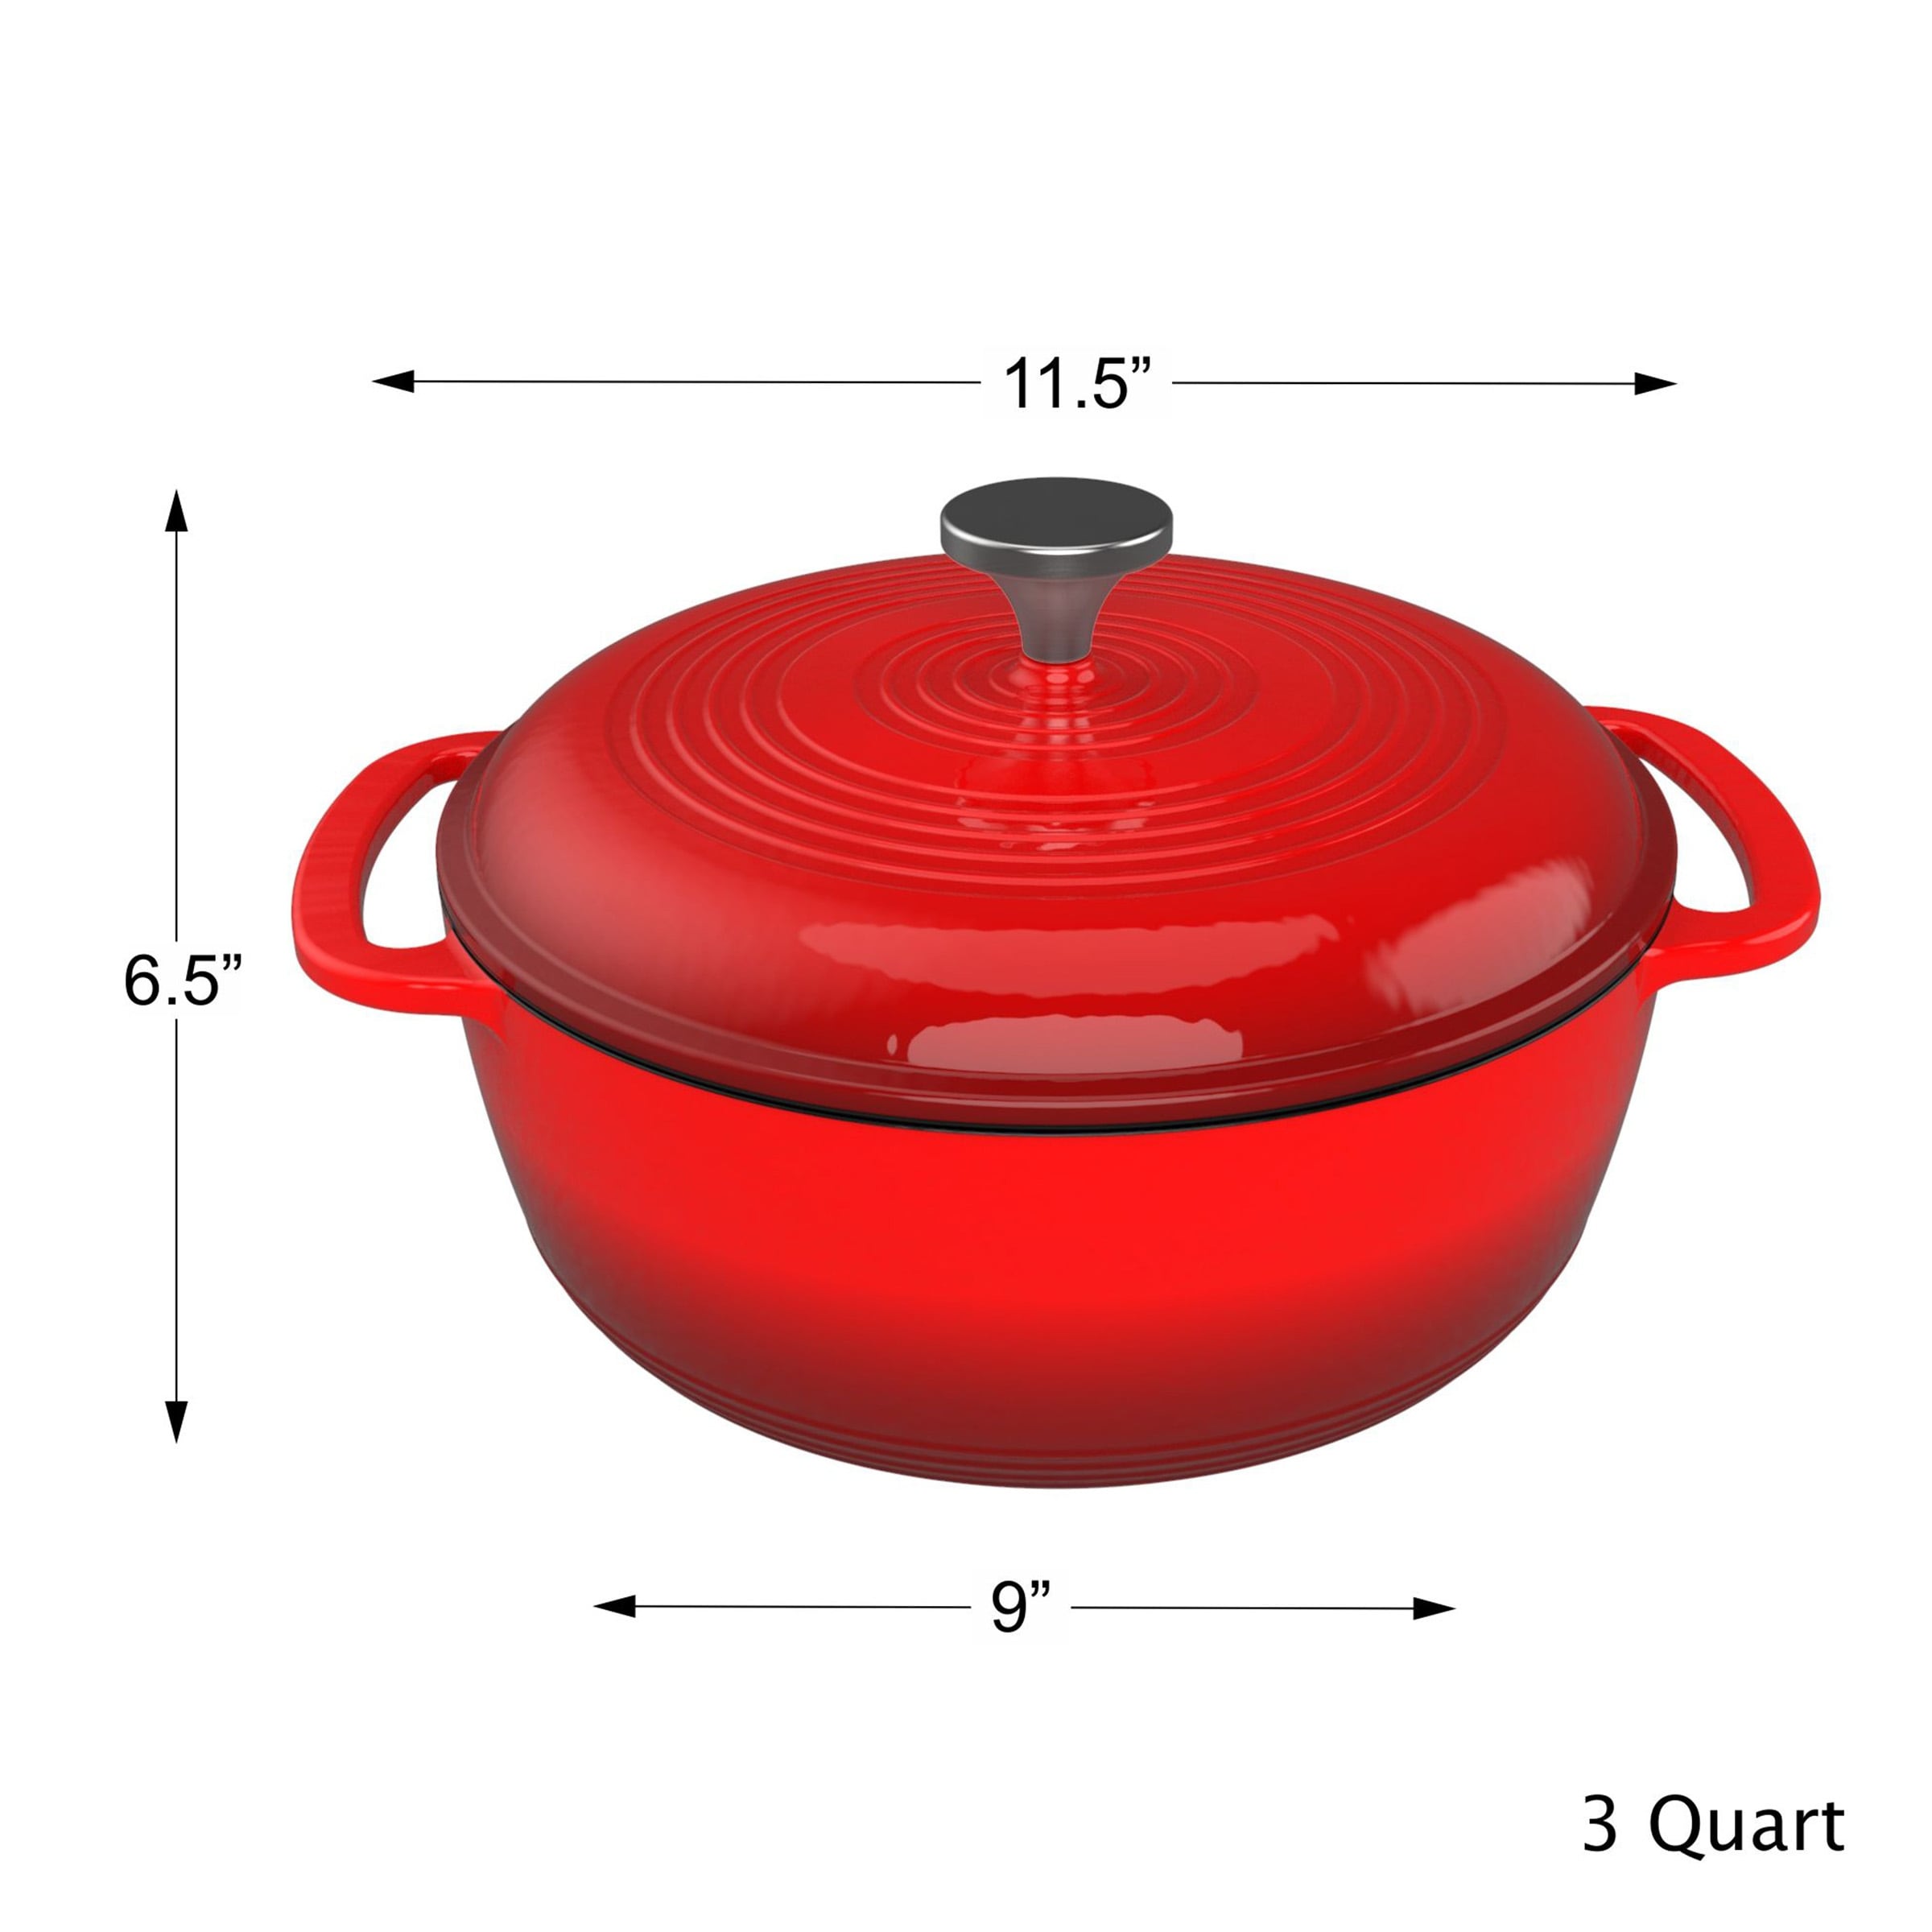 https://ak1.ostkcdn.com/images/products/is/images/direct/02fbc4b5c6cfacaf90eca98b6c33115949474c4e/Dutch-Oven-Pot-with-Lid---Enameled-Cast-Iron-Cookware-for-Oven-or-Stovetop-Use-by-Classic-Cuisine-%28Red%29.jpg